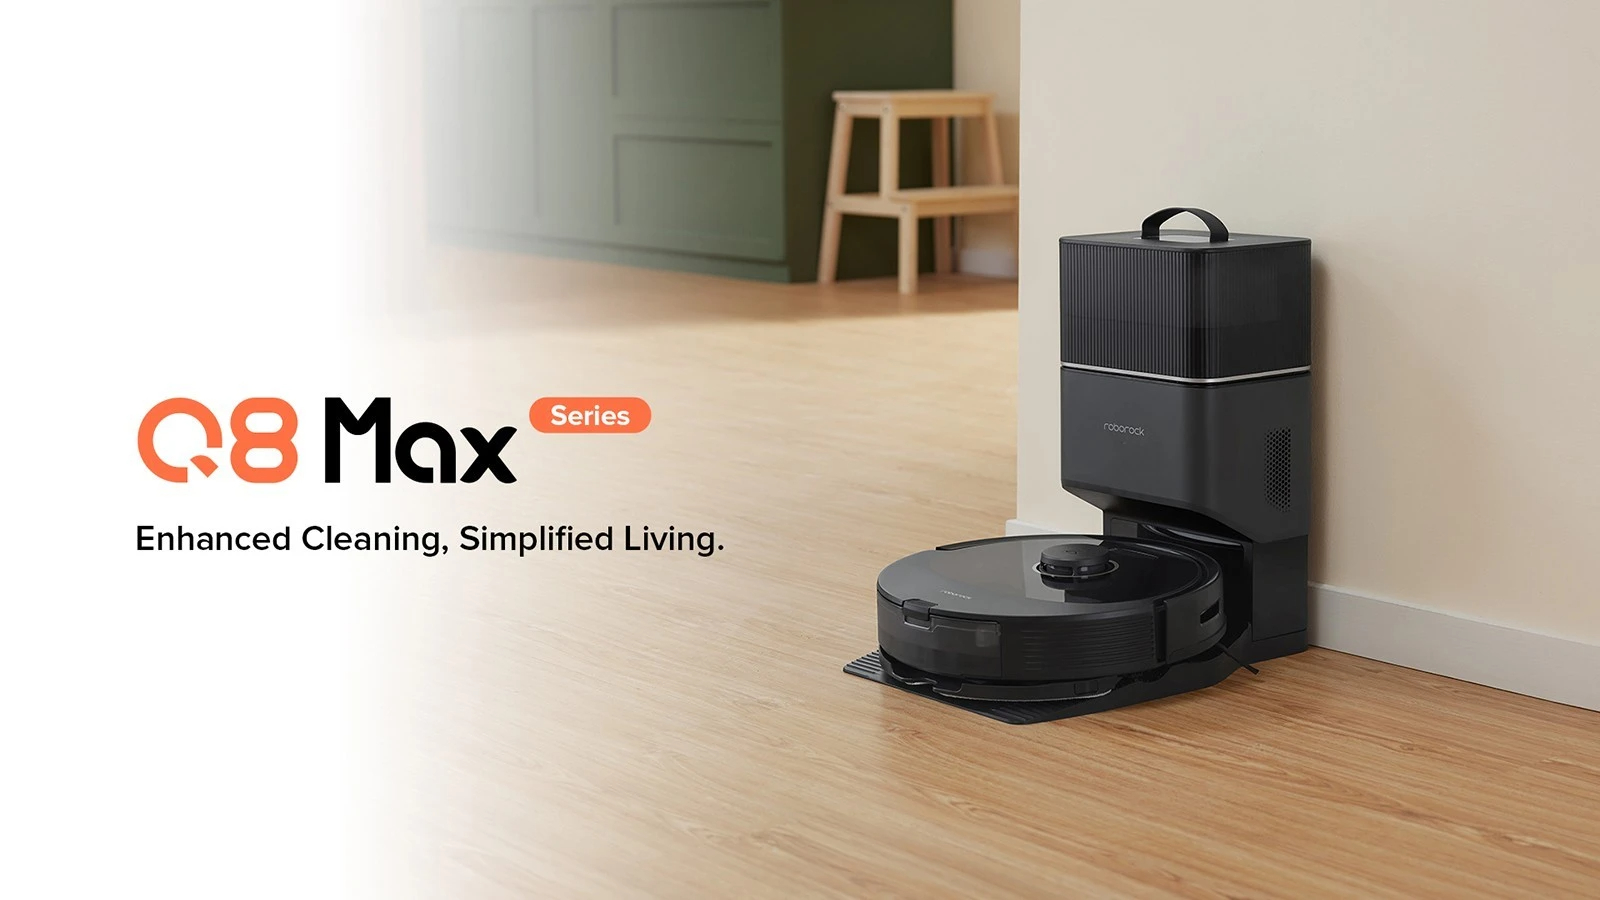 Why Roborock Q8 Max+ is the Best Robot Vacuum for Most! 